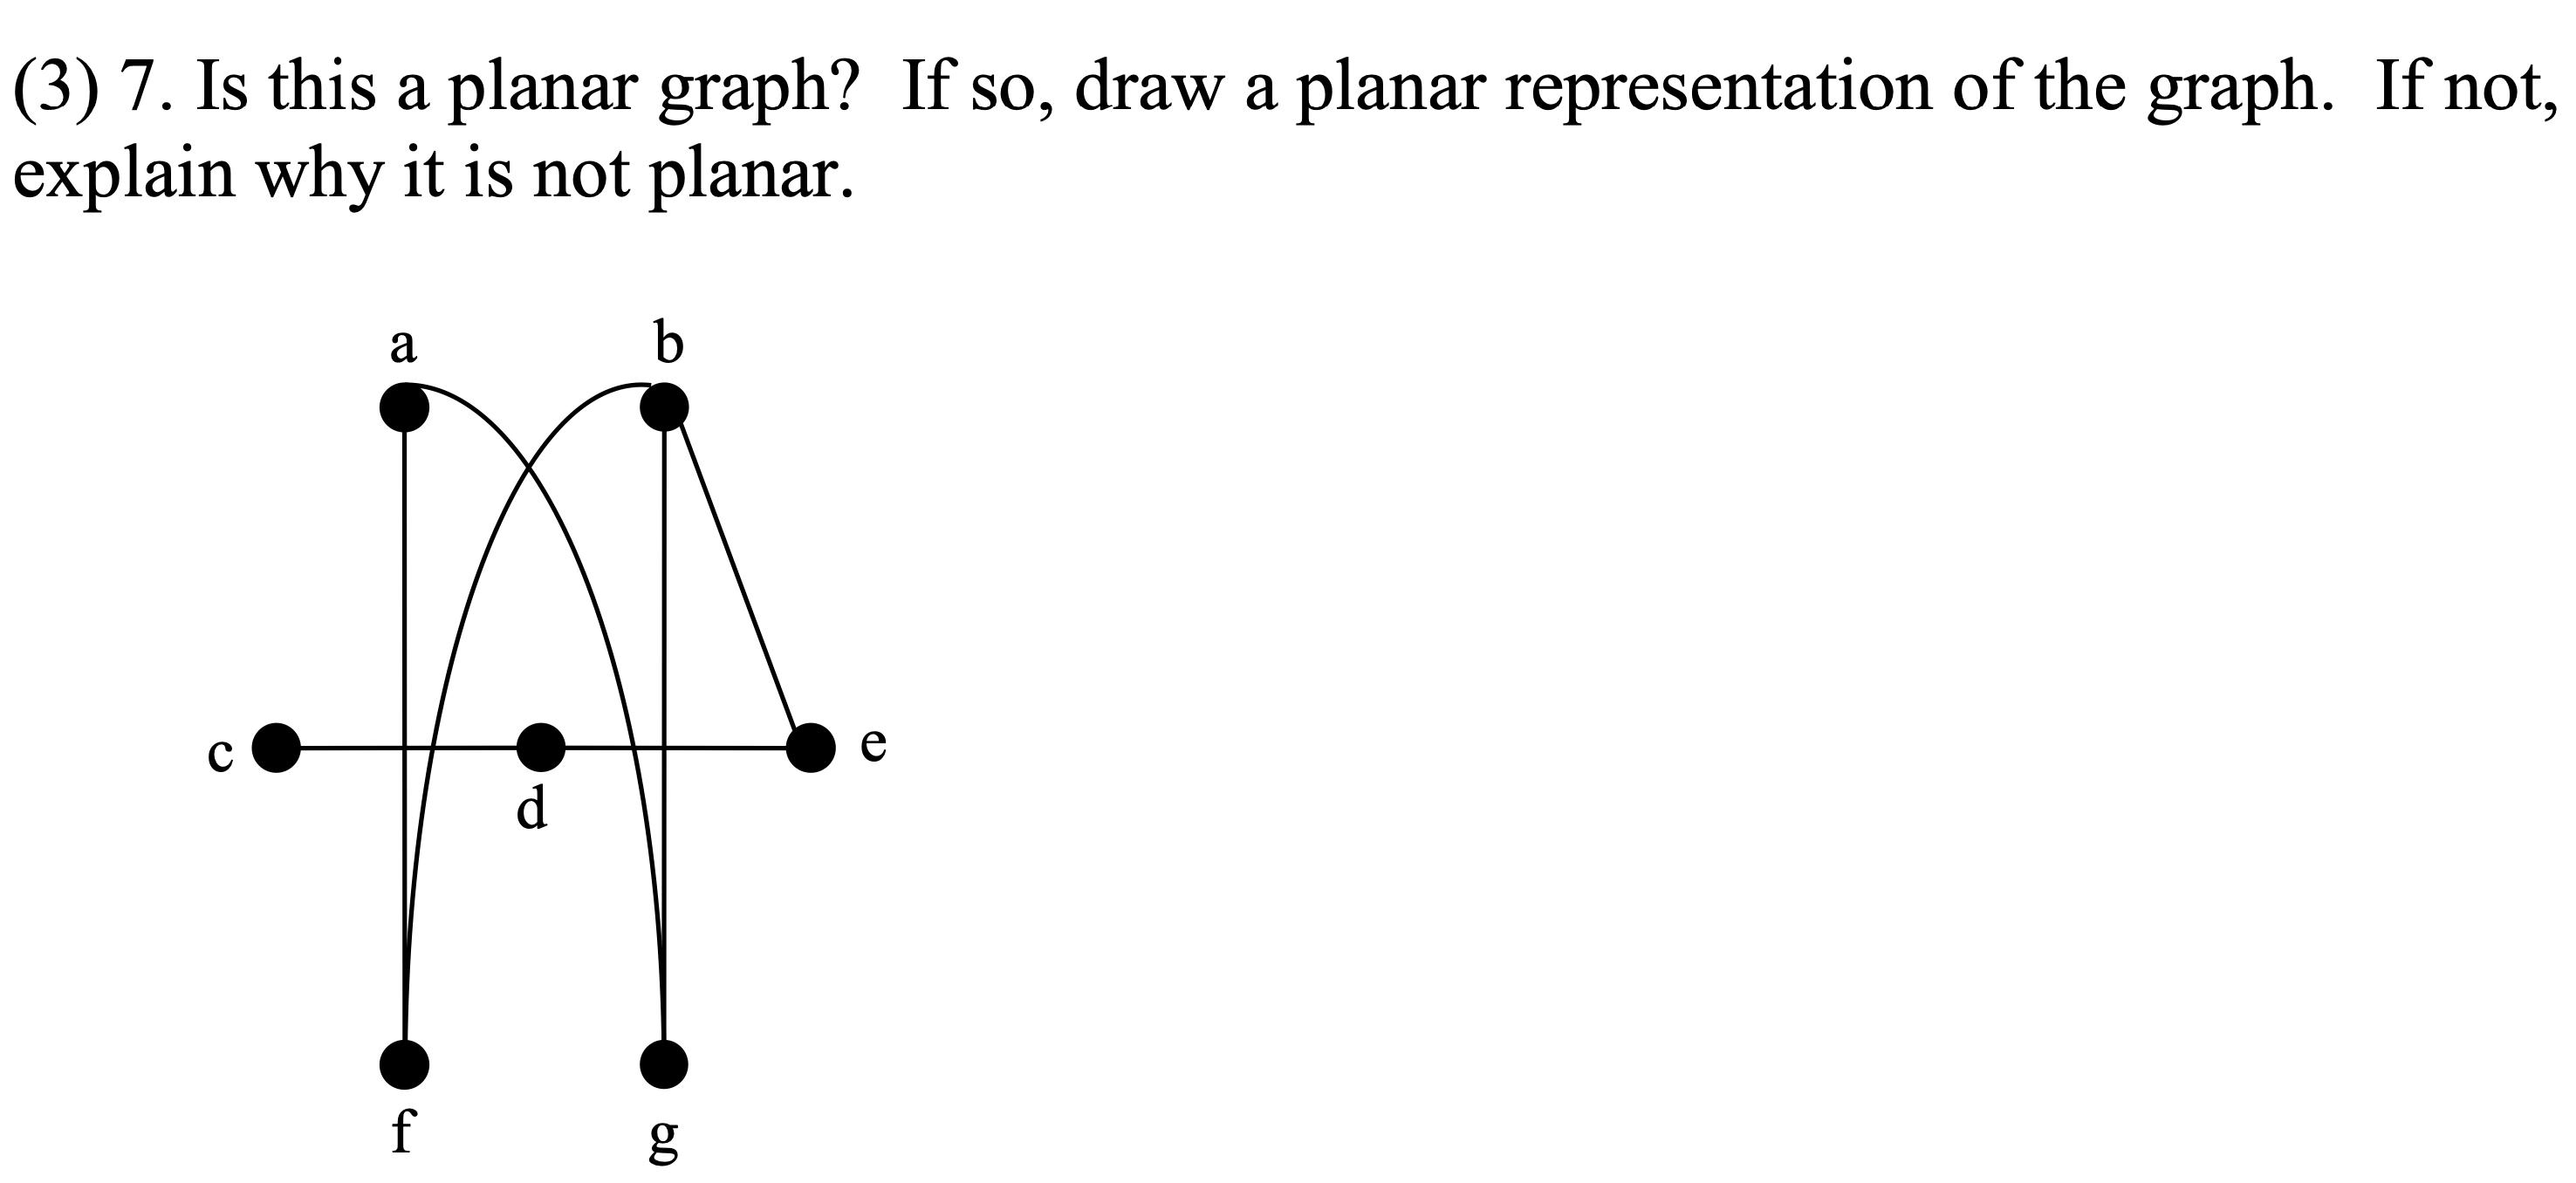 (3) 7. Is this a planar graph? If so, draw a planar representation of the graph. If not, explain why it is